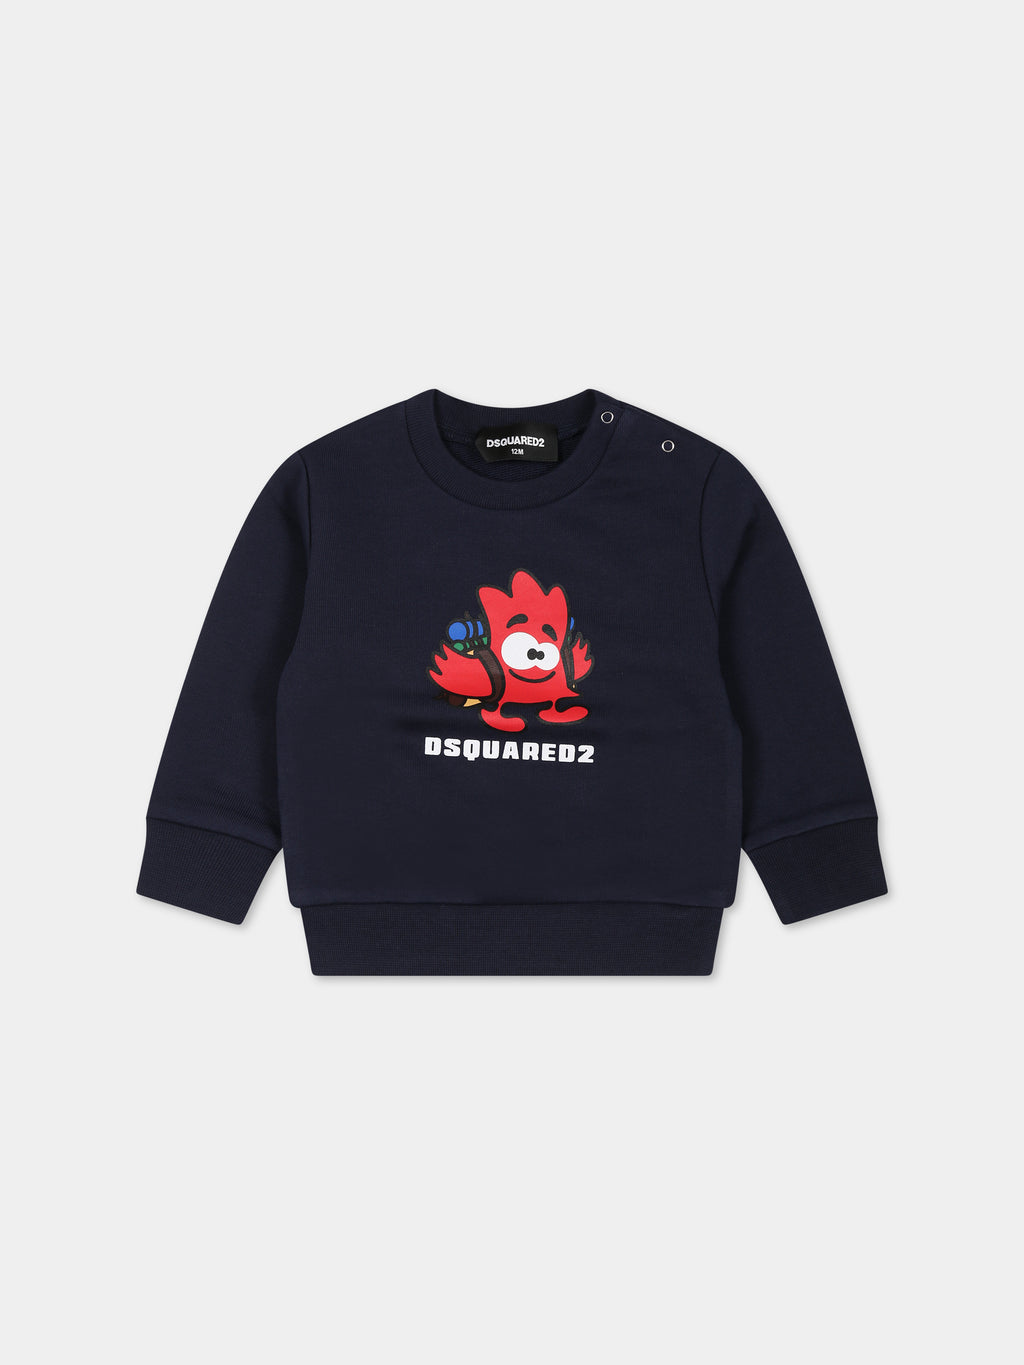 Blue sweatshirt for baby boy with logo and print